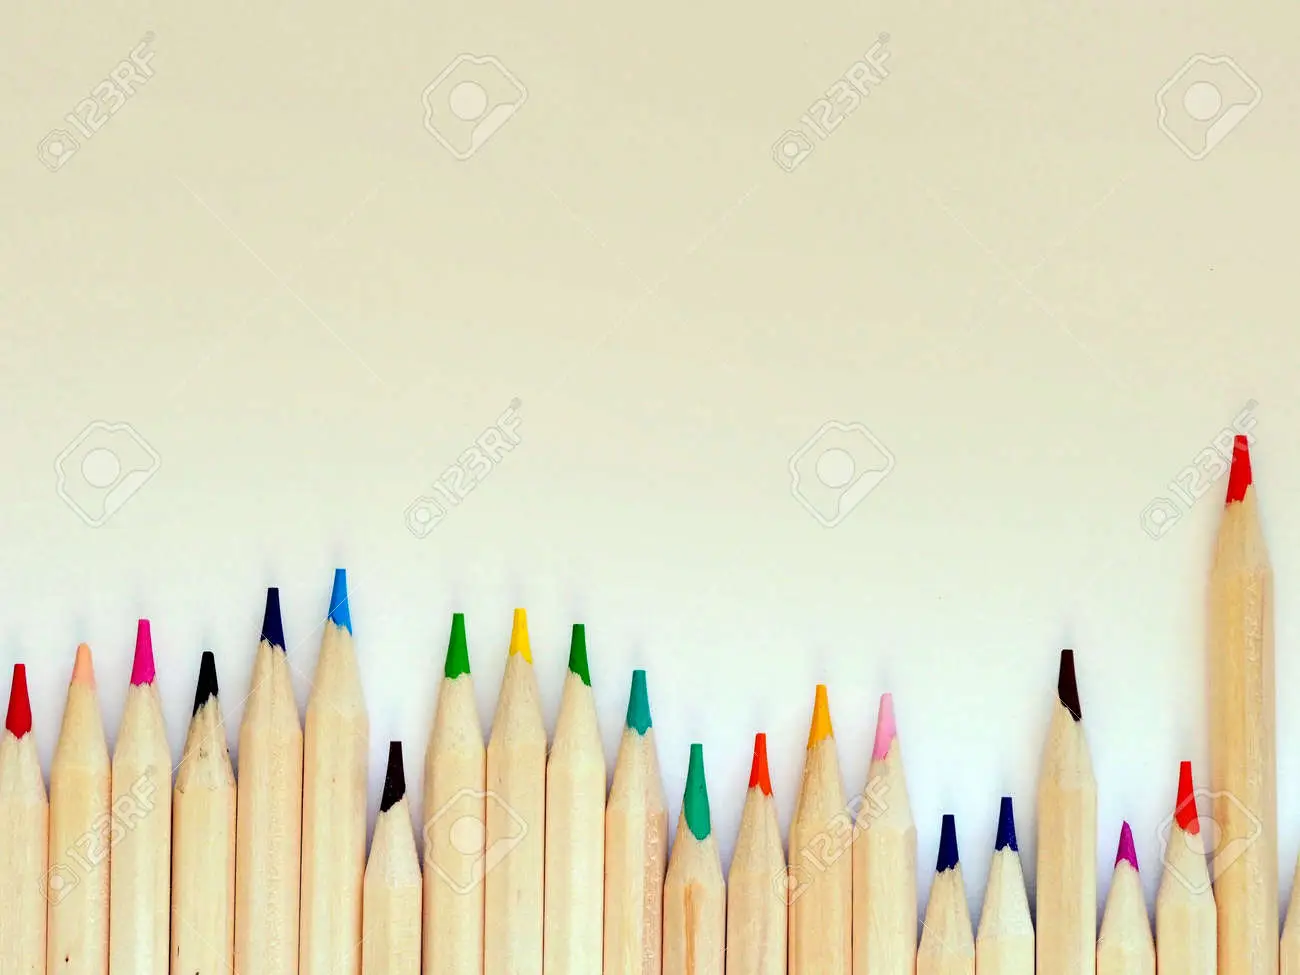 Multi colored pencils art wallpaper background stock photo picture and royalty free image image